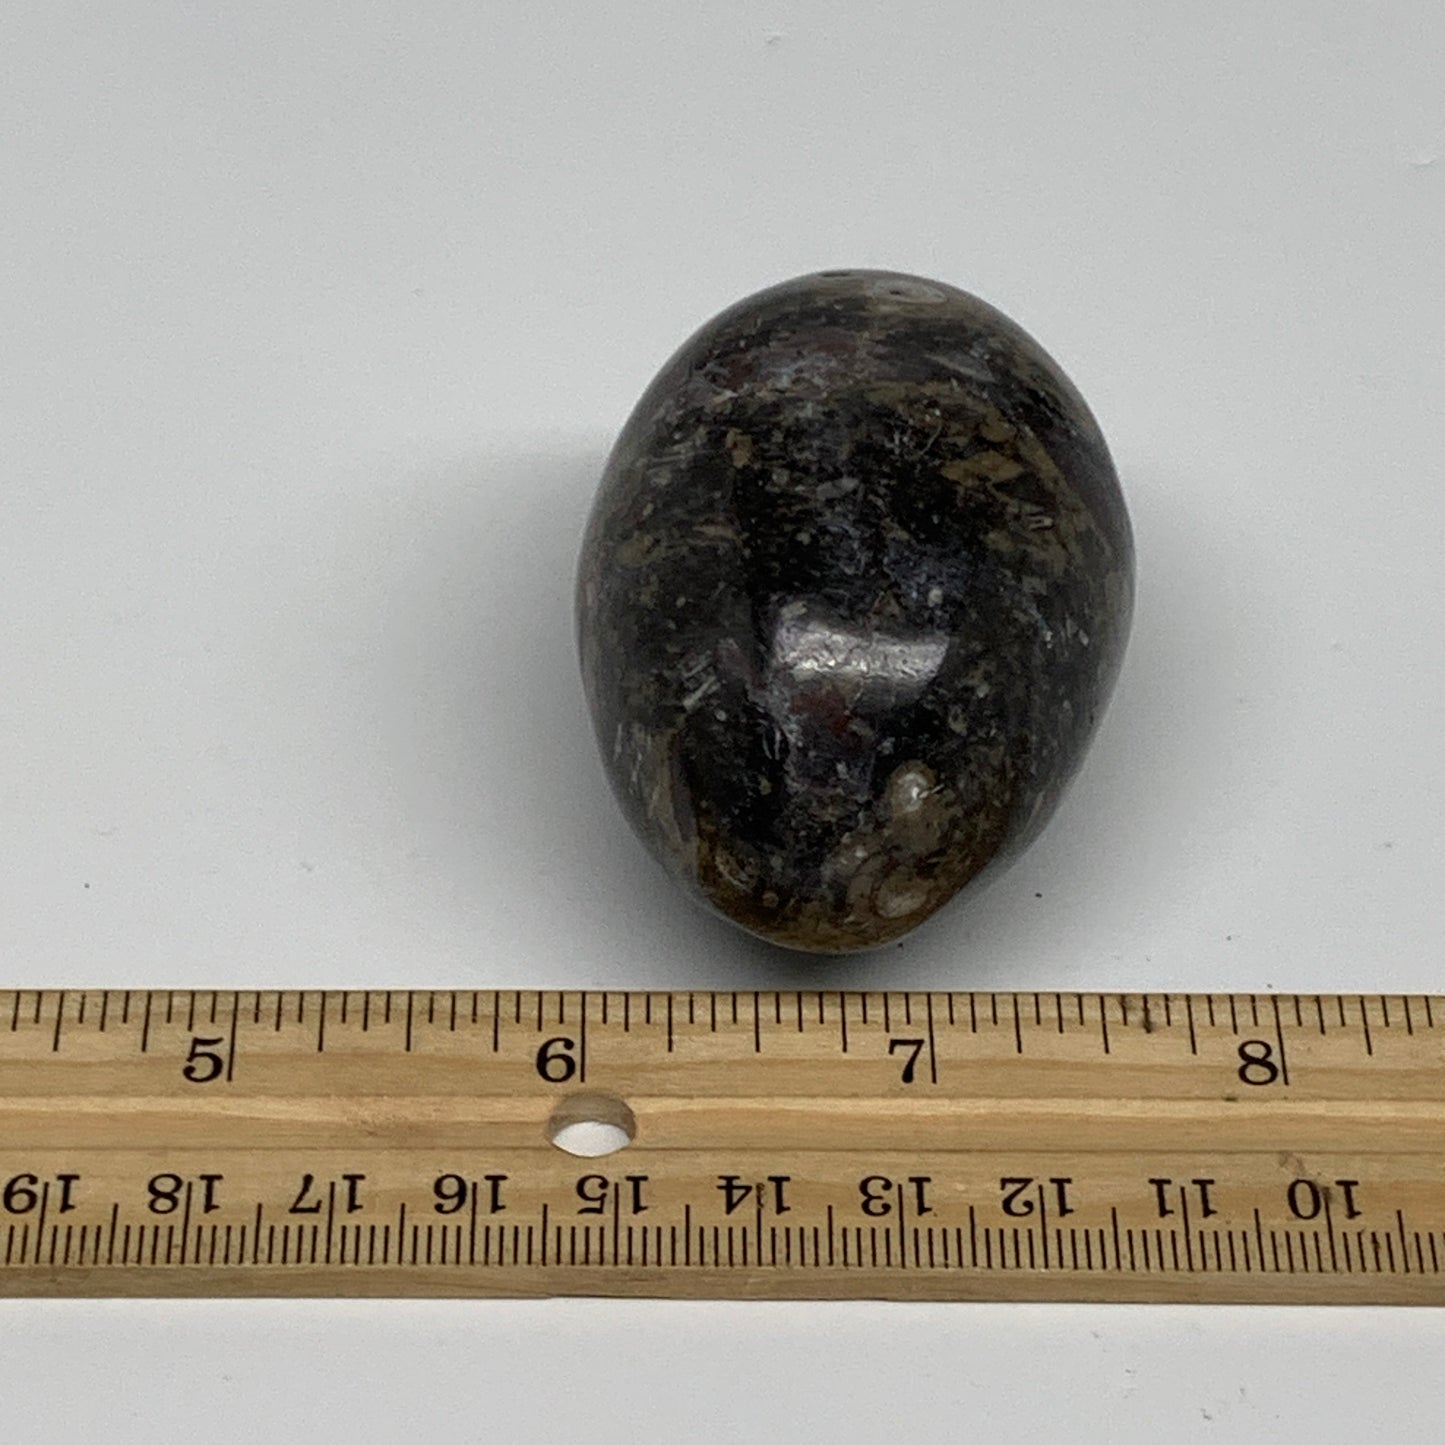 142g, 2.3"x1.6", Natural Fossil Orthoceras Stone Egg from Morocco, B31056